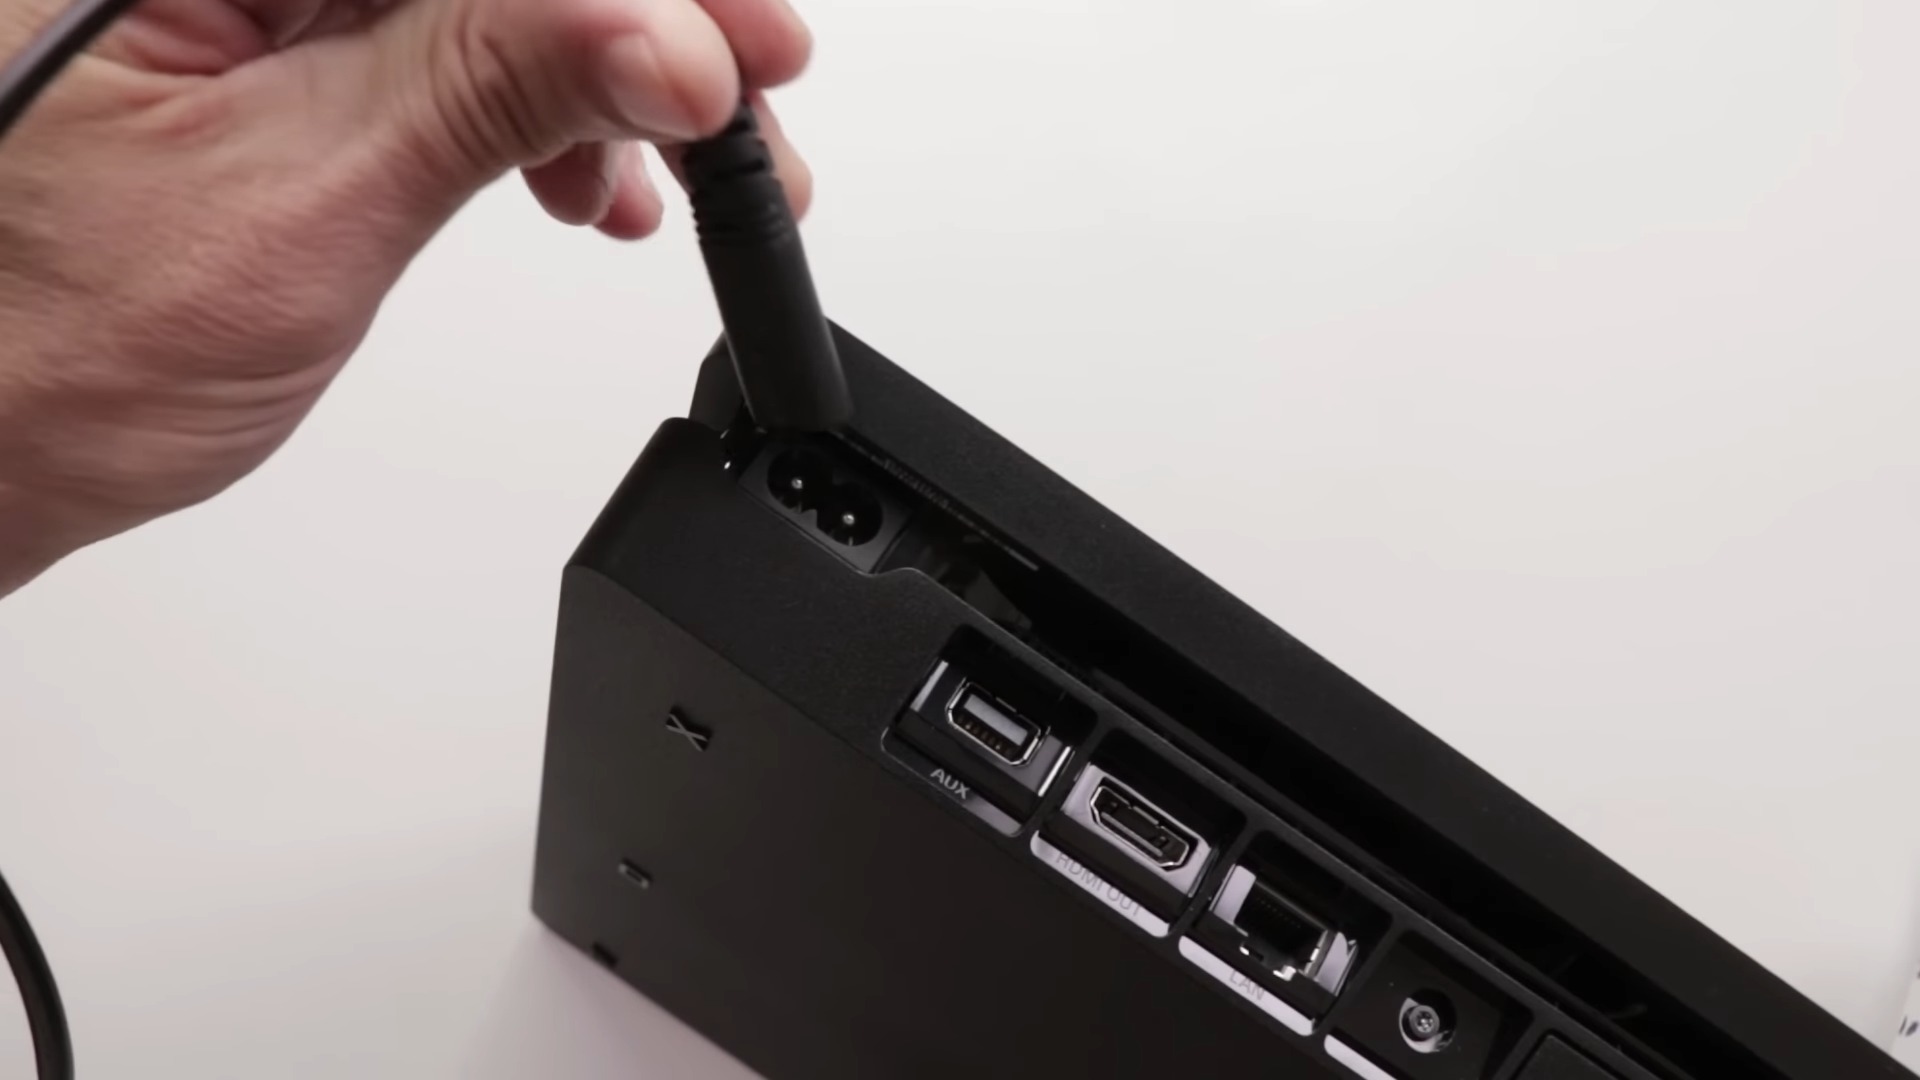 Ensure the PS4 is completely turned off and unplugged from the power source.
Inspect the power outlet and the power cord for any visible damage or loose connections.